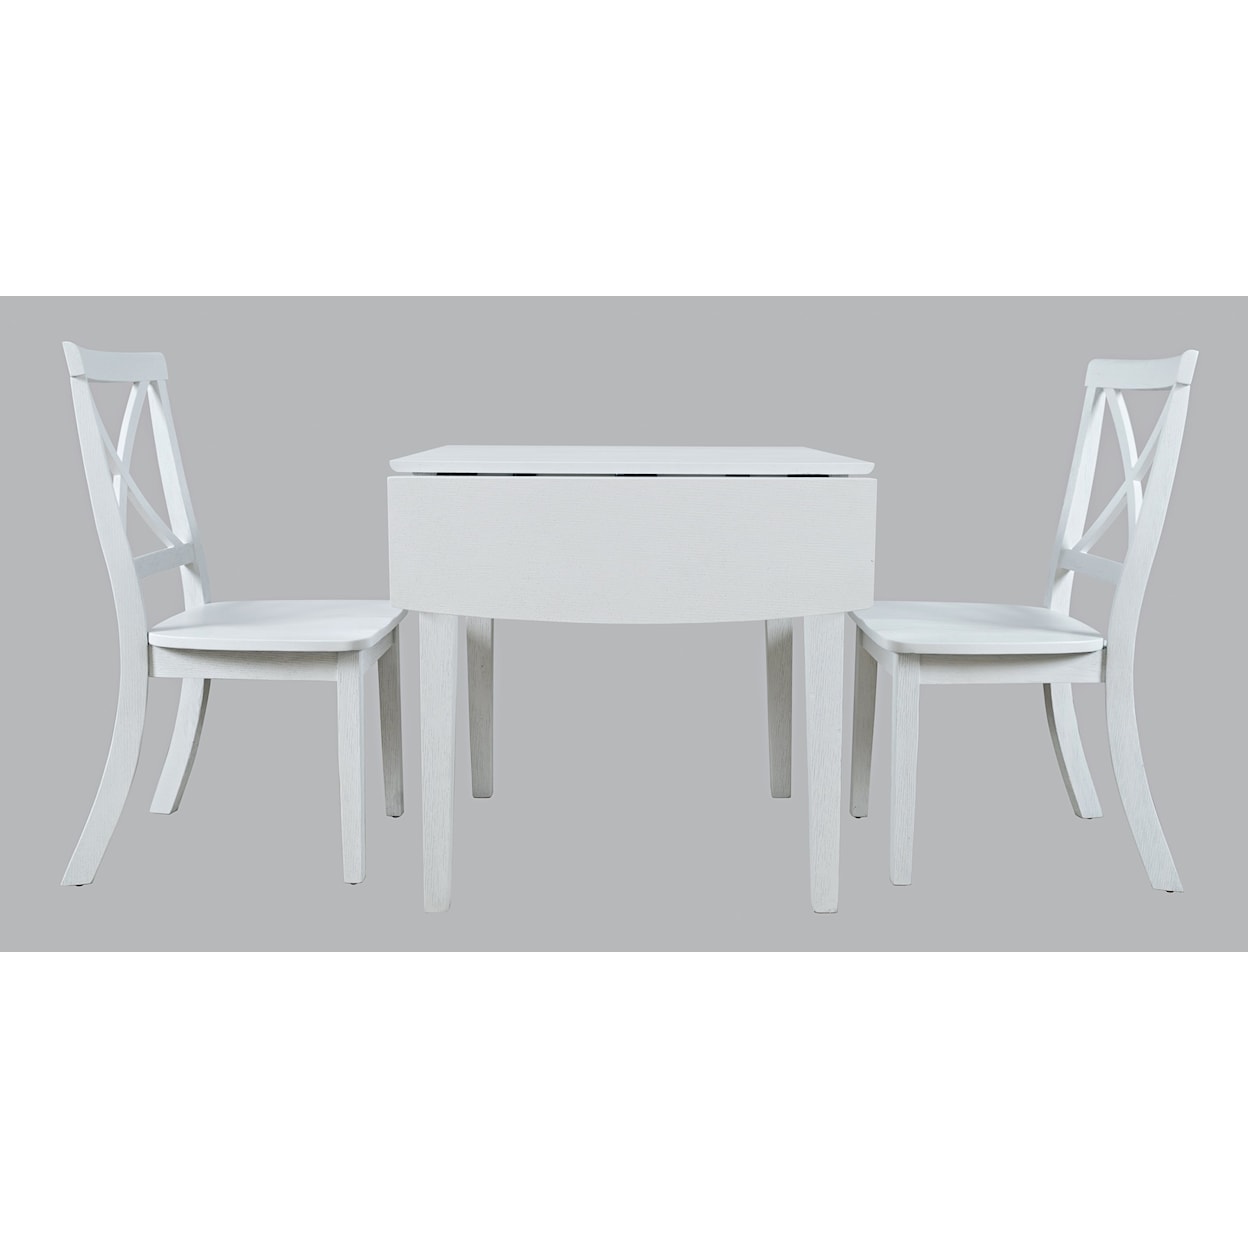 Jofran Eastern Tides 3 Piece Table and Chair Set